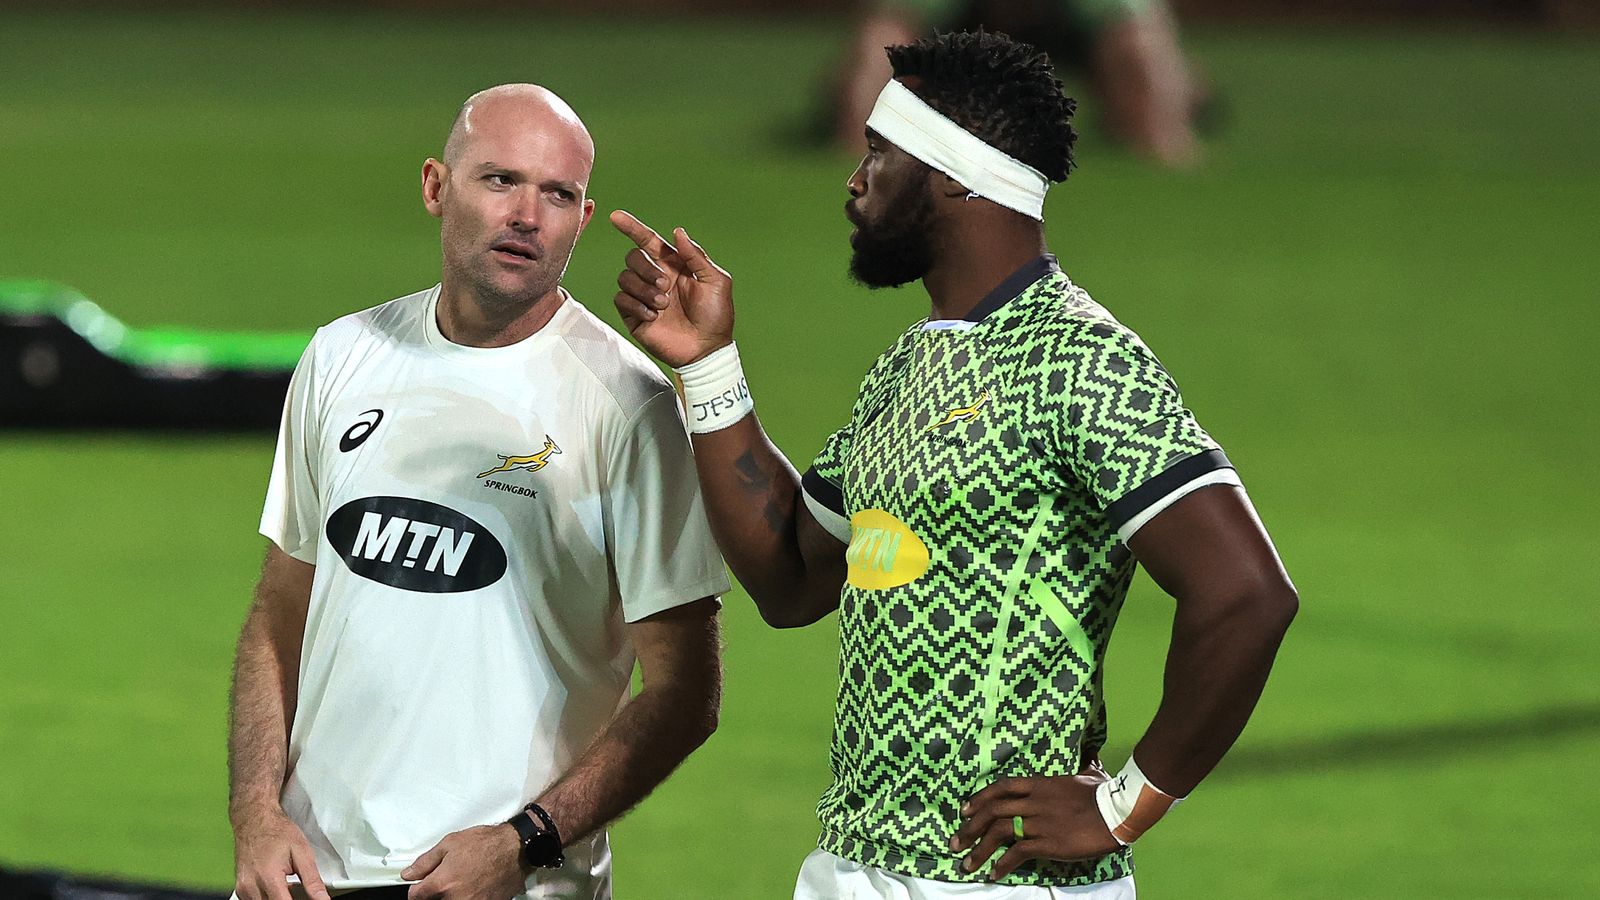 Springboks suspend training and whole squad placed in isolation after Lood de Jager positive Covid-19 result